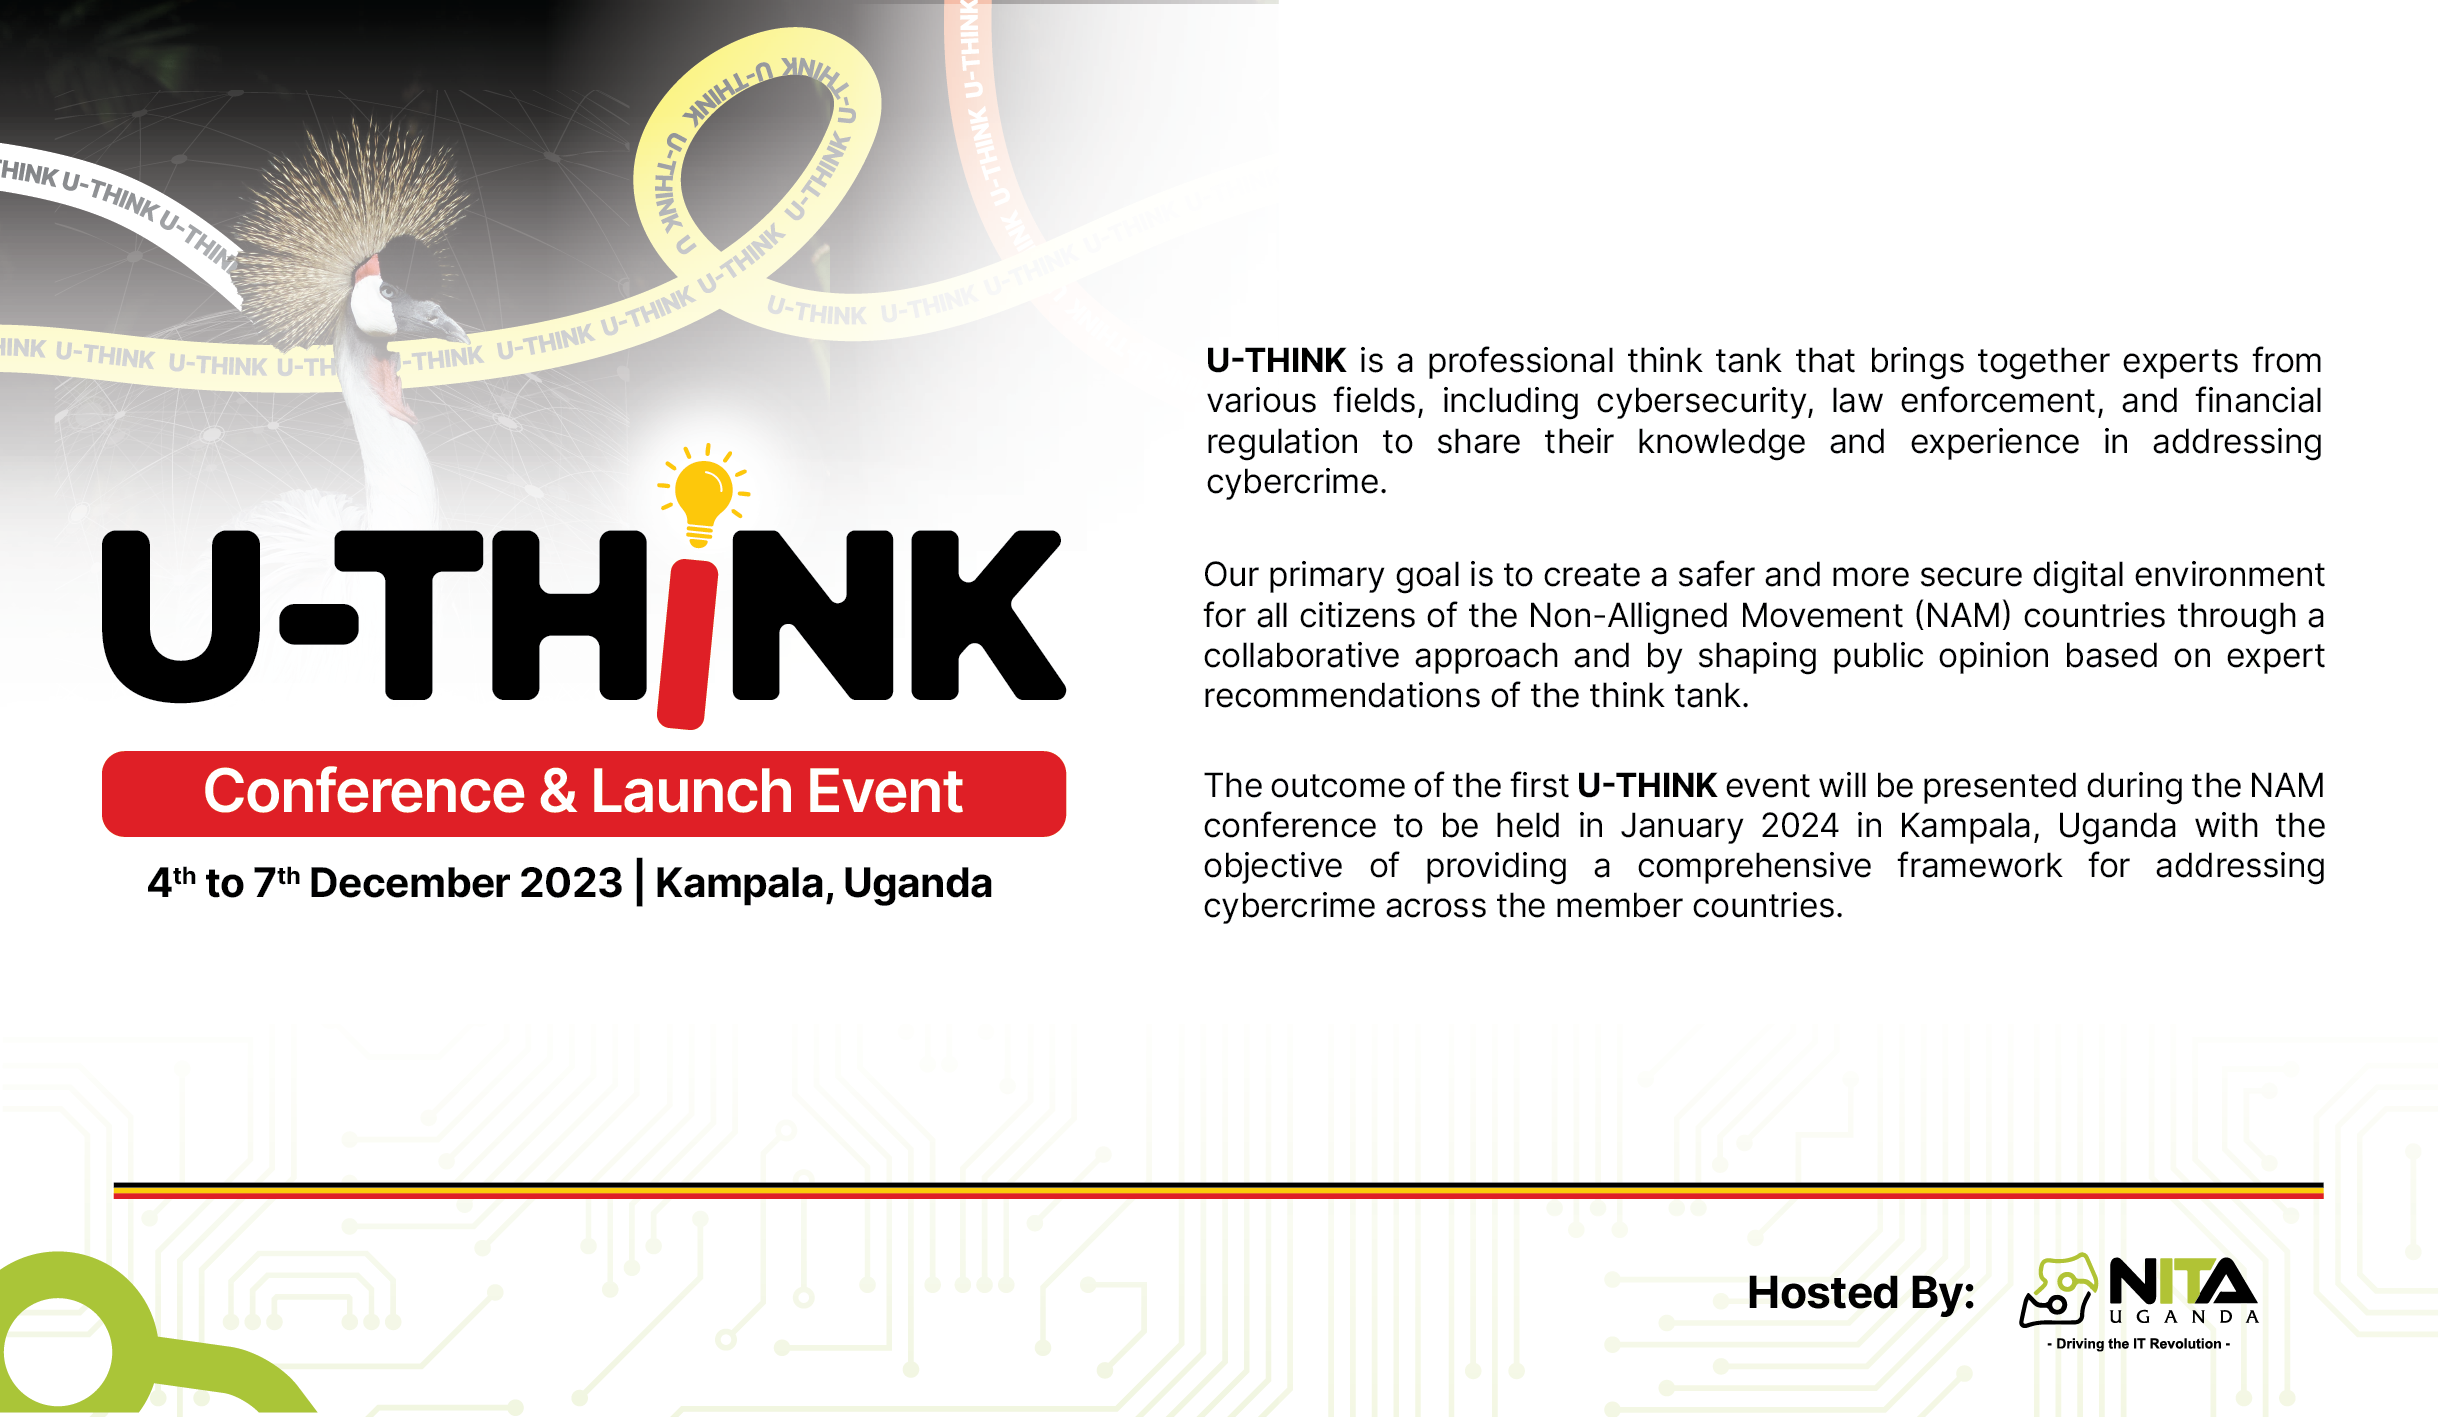 U-THINK Conference and Launch Event